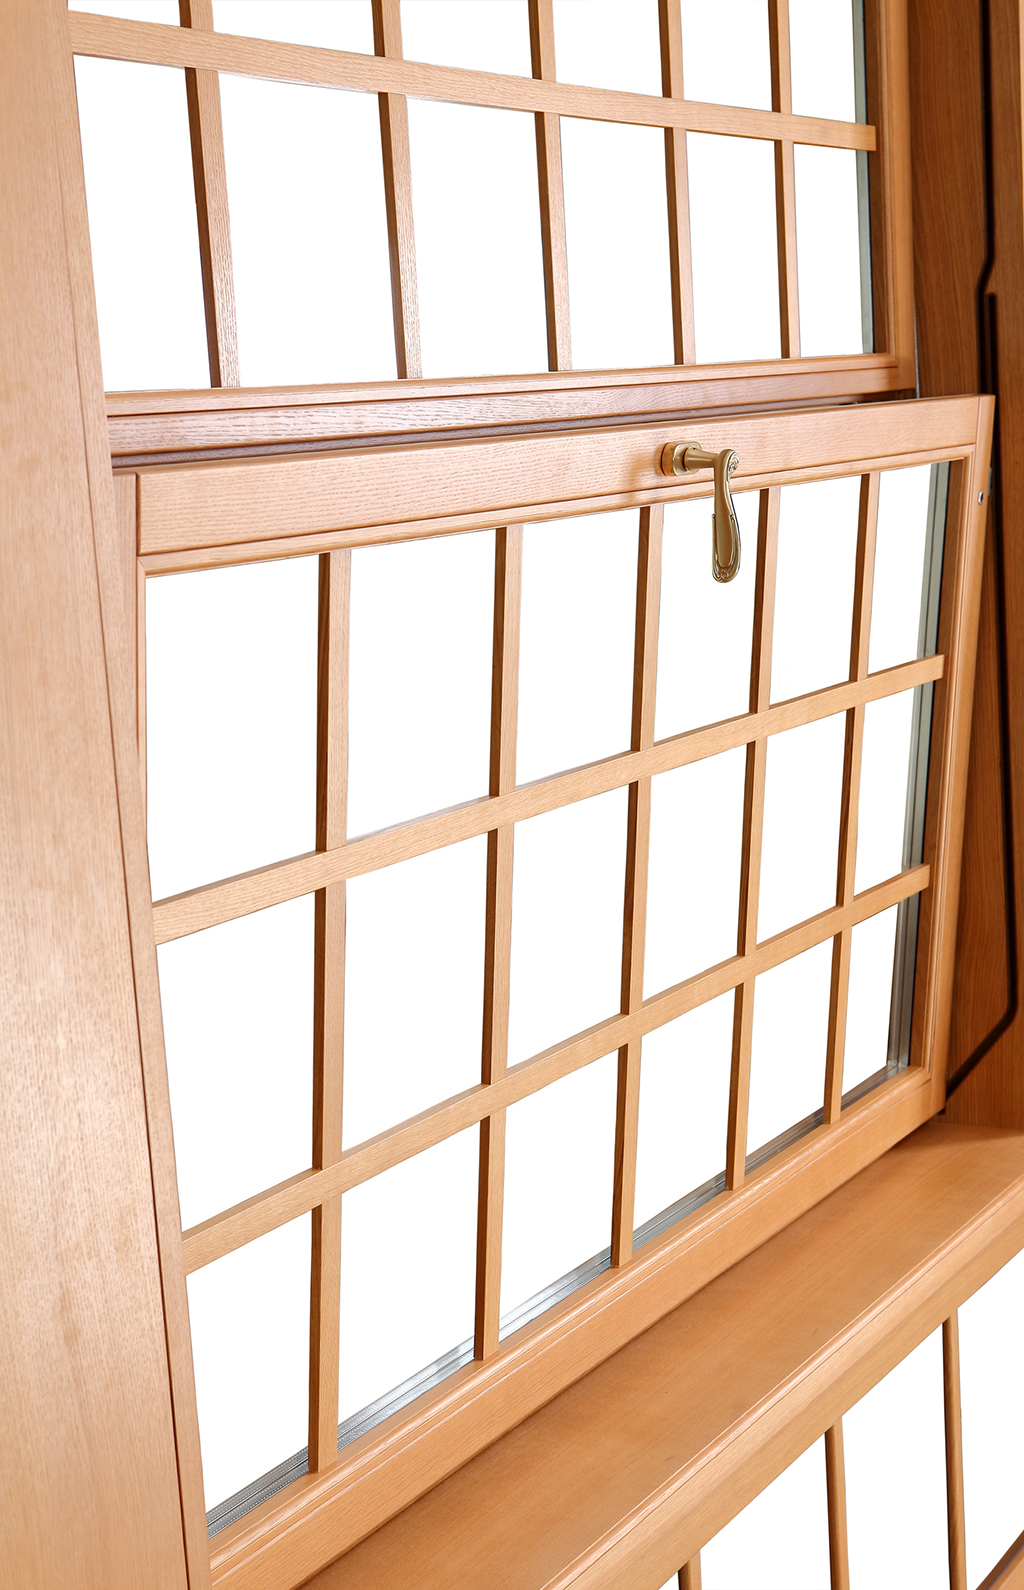 All You Need To Know About Double Hung Home Windows | Oahu, HI